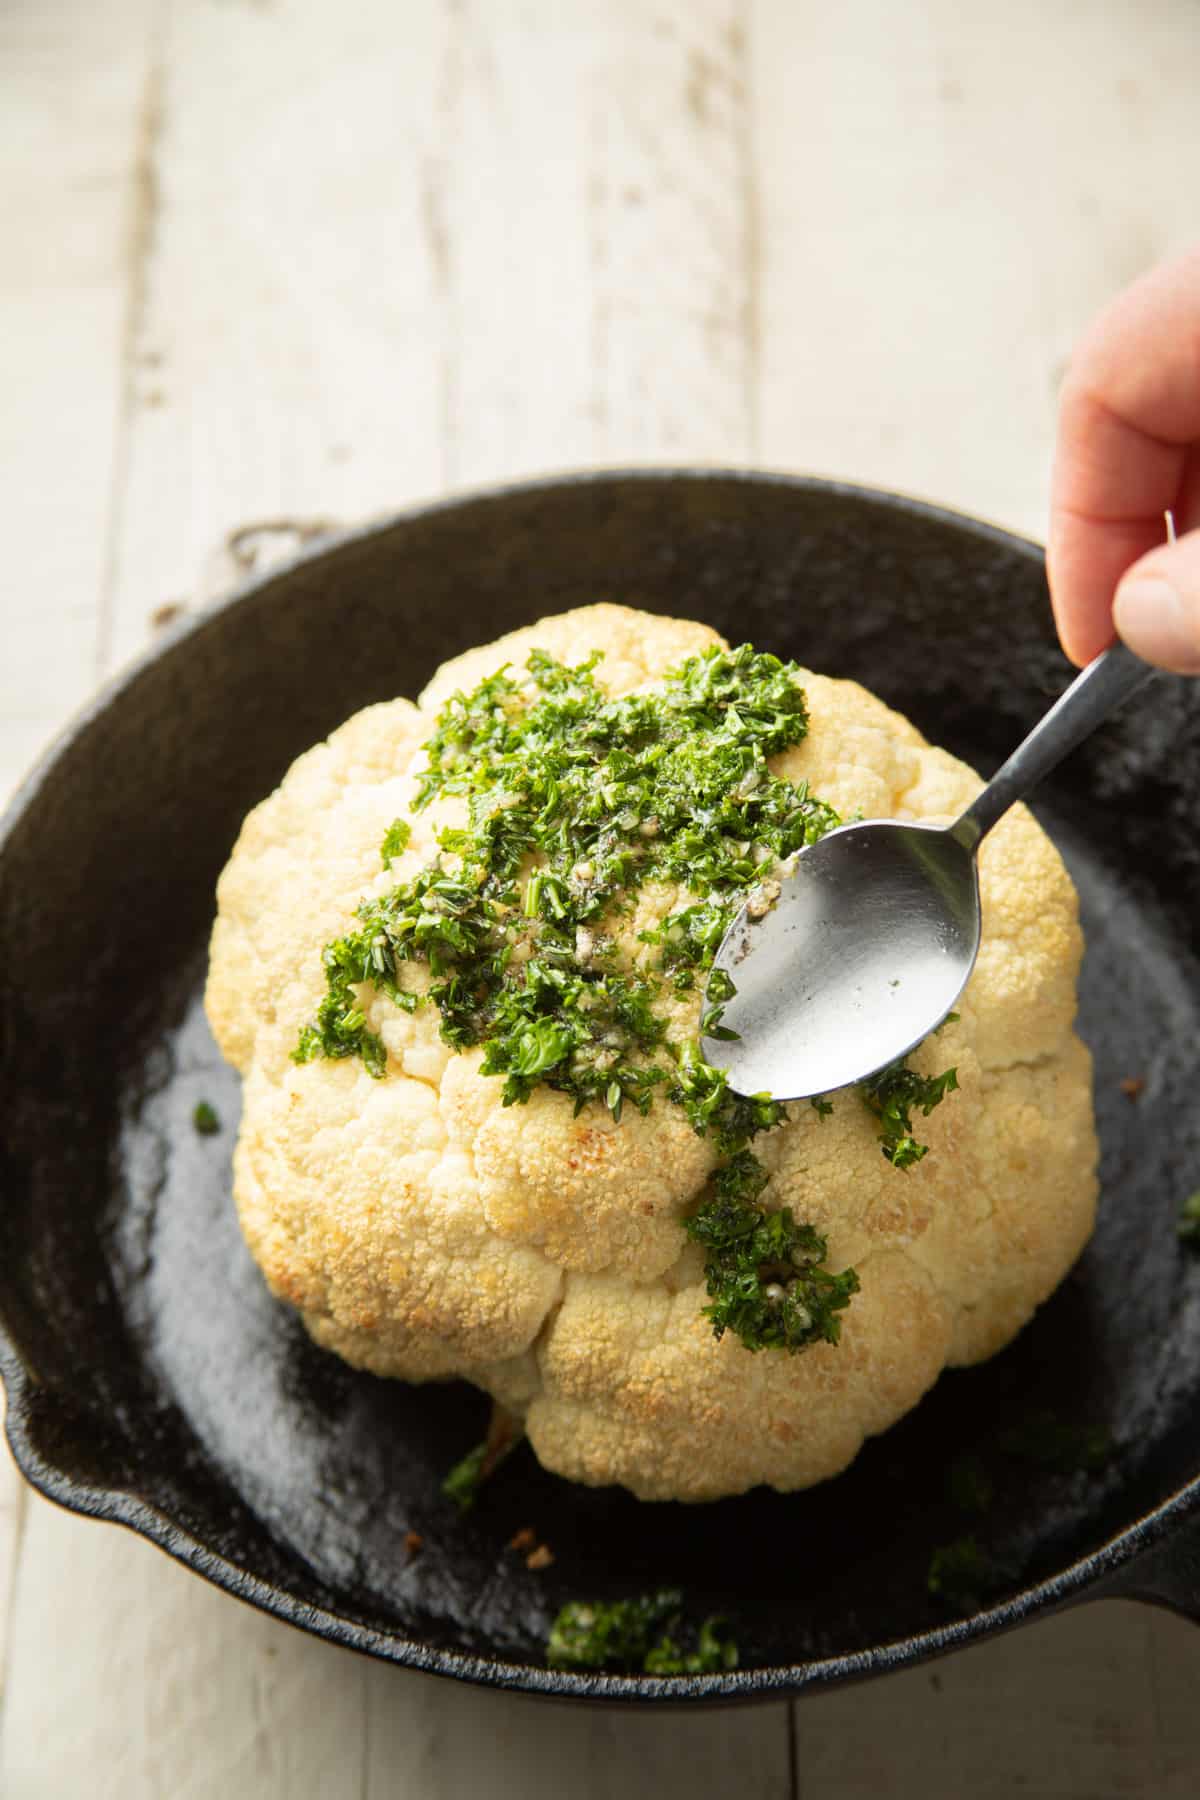 Spoon spreading herbs and olive oil on a cauliflower head.